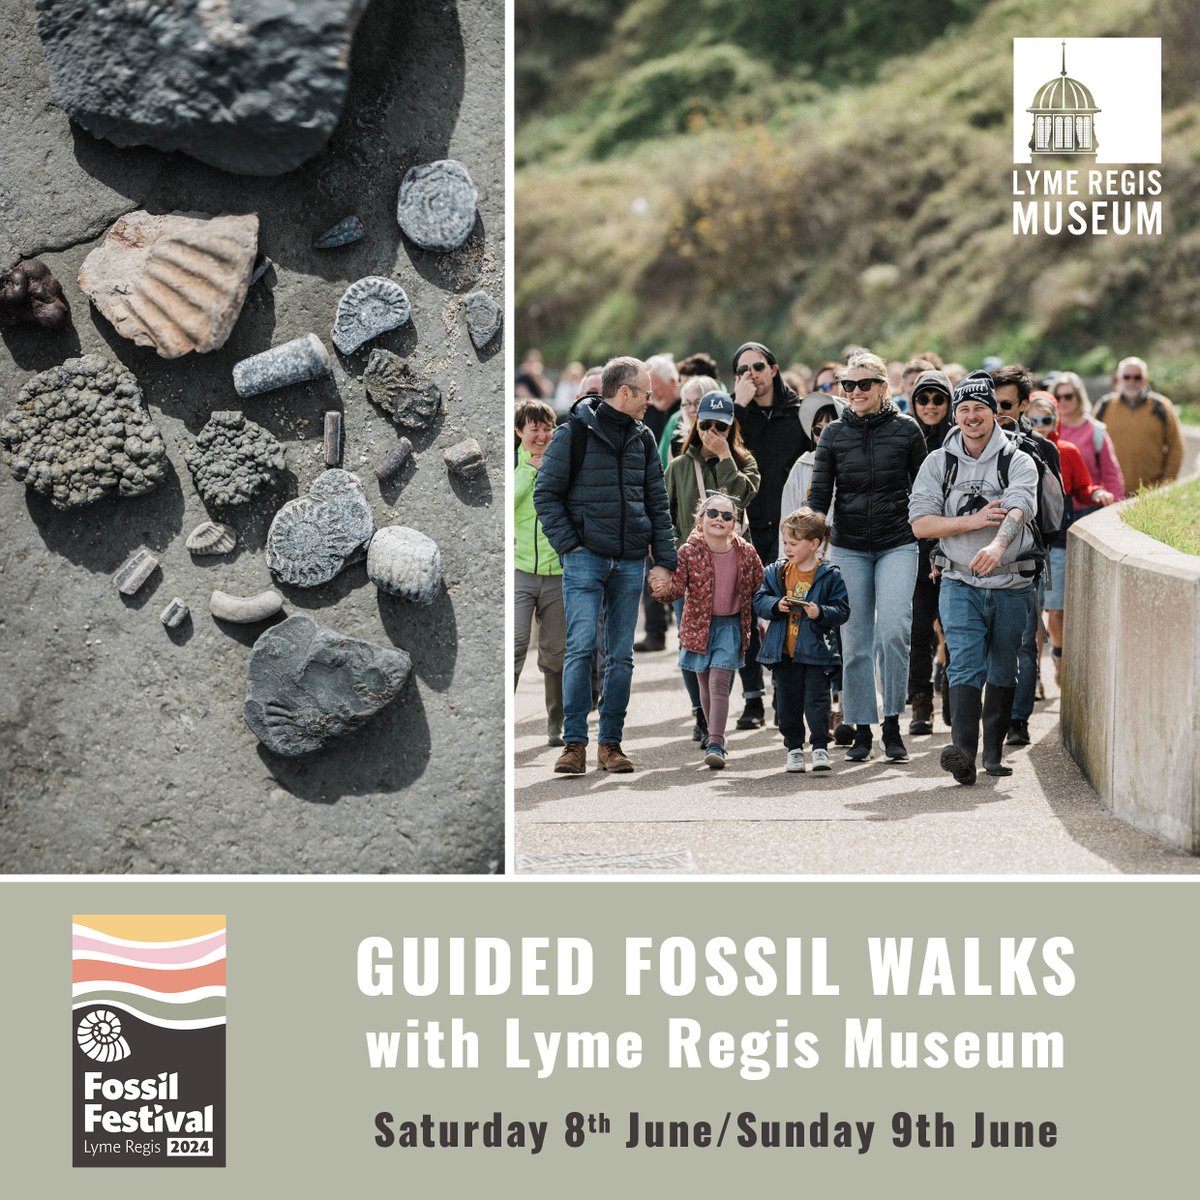 Fossil Festival - GUIDED FOSSIL WALKS with Lyme Regis Museum. Go fossil hunting on Lyme’s famous East beach and Black Ven, learn all about the geology of the Jurassic Coast and discover your own fossils to take home! Walks last between 2.5-3hrs. Book via the link in our bio.